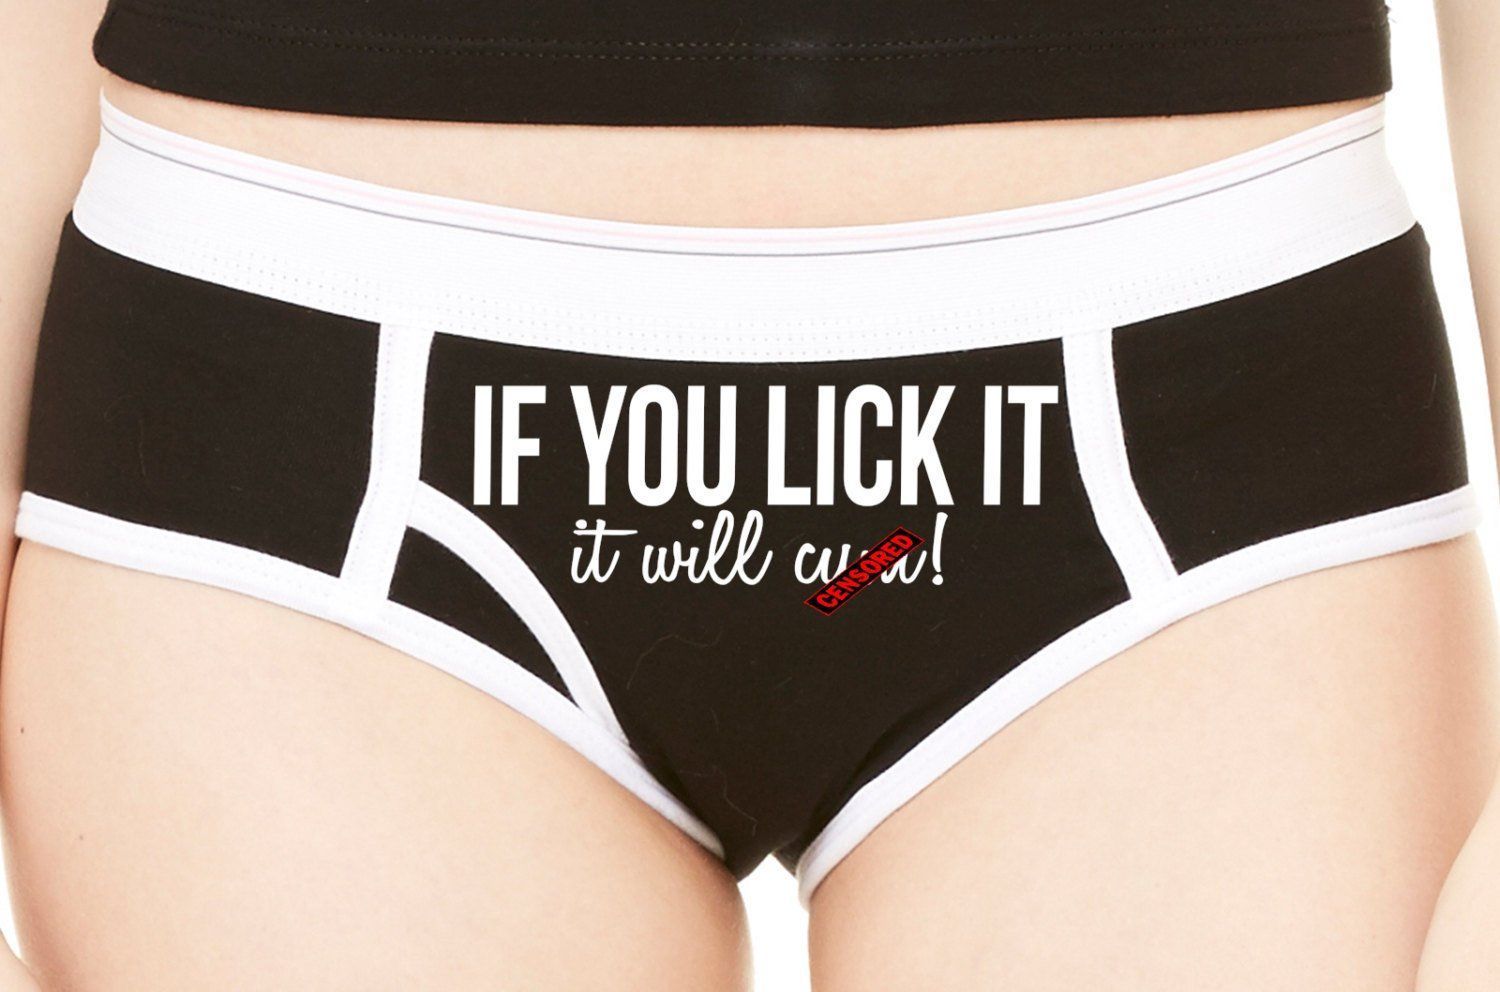 Lick cum on panties picture